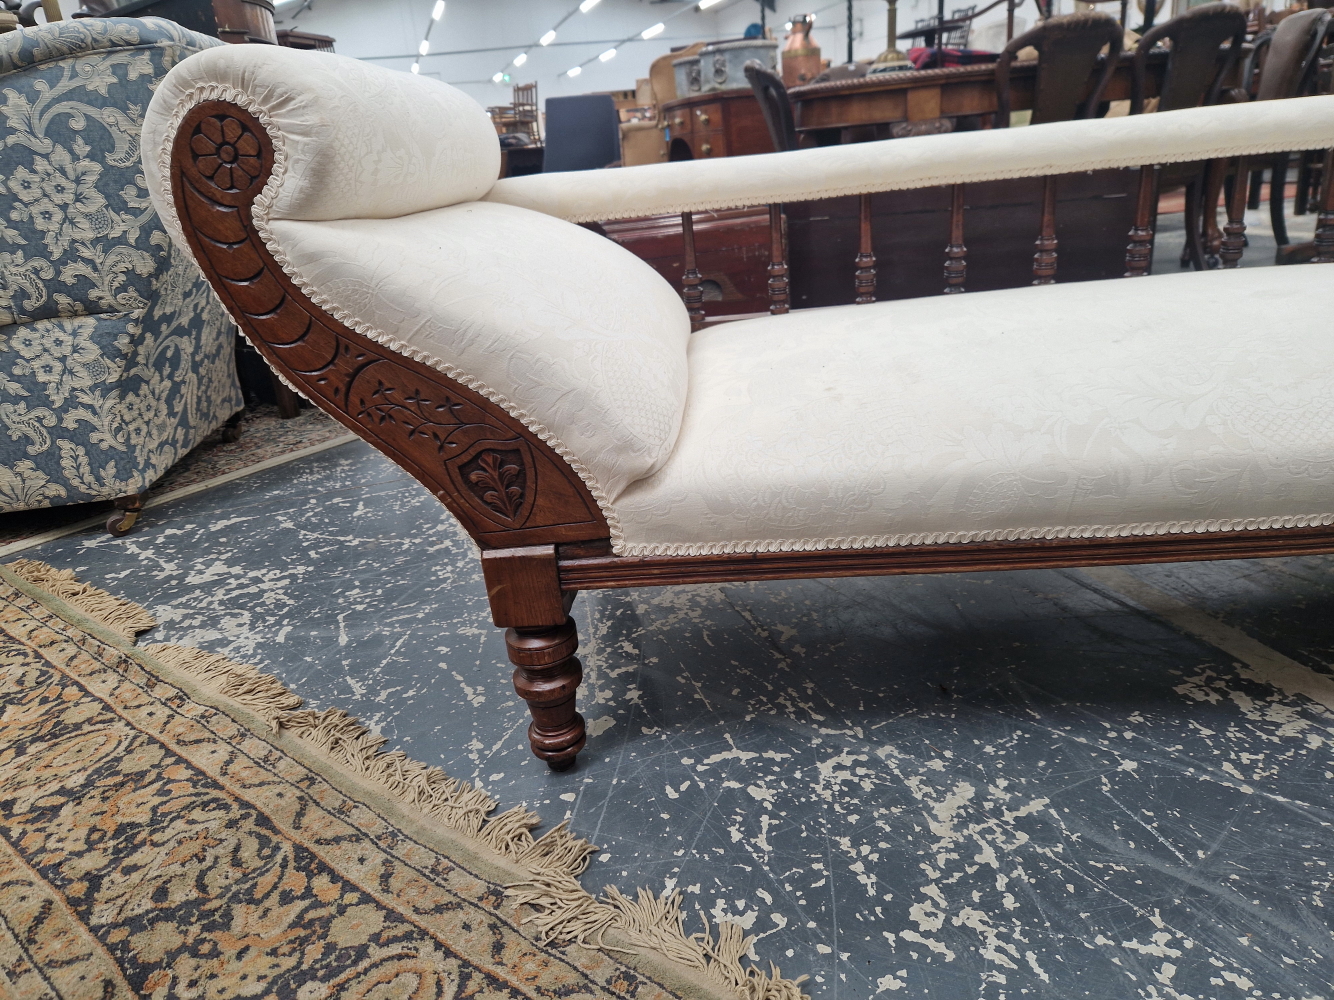 AN EARLY 20th C. MAHOGANY CHAISE LONGUE UPHOLSTERED IN WHITE DAMASK, ONE LONG SIDE WITH A BALUSTRADE - Image 2 of 6